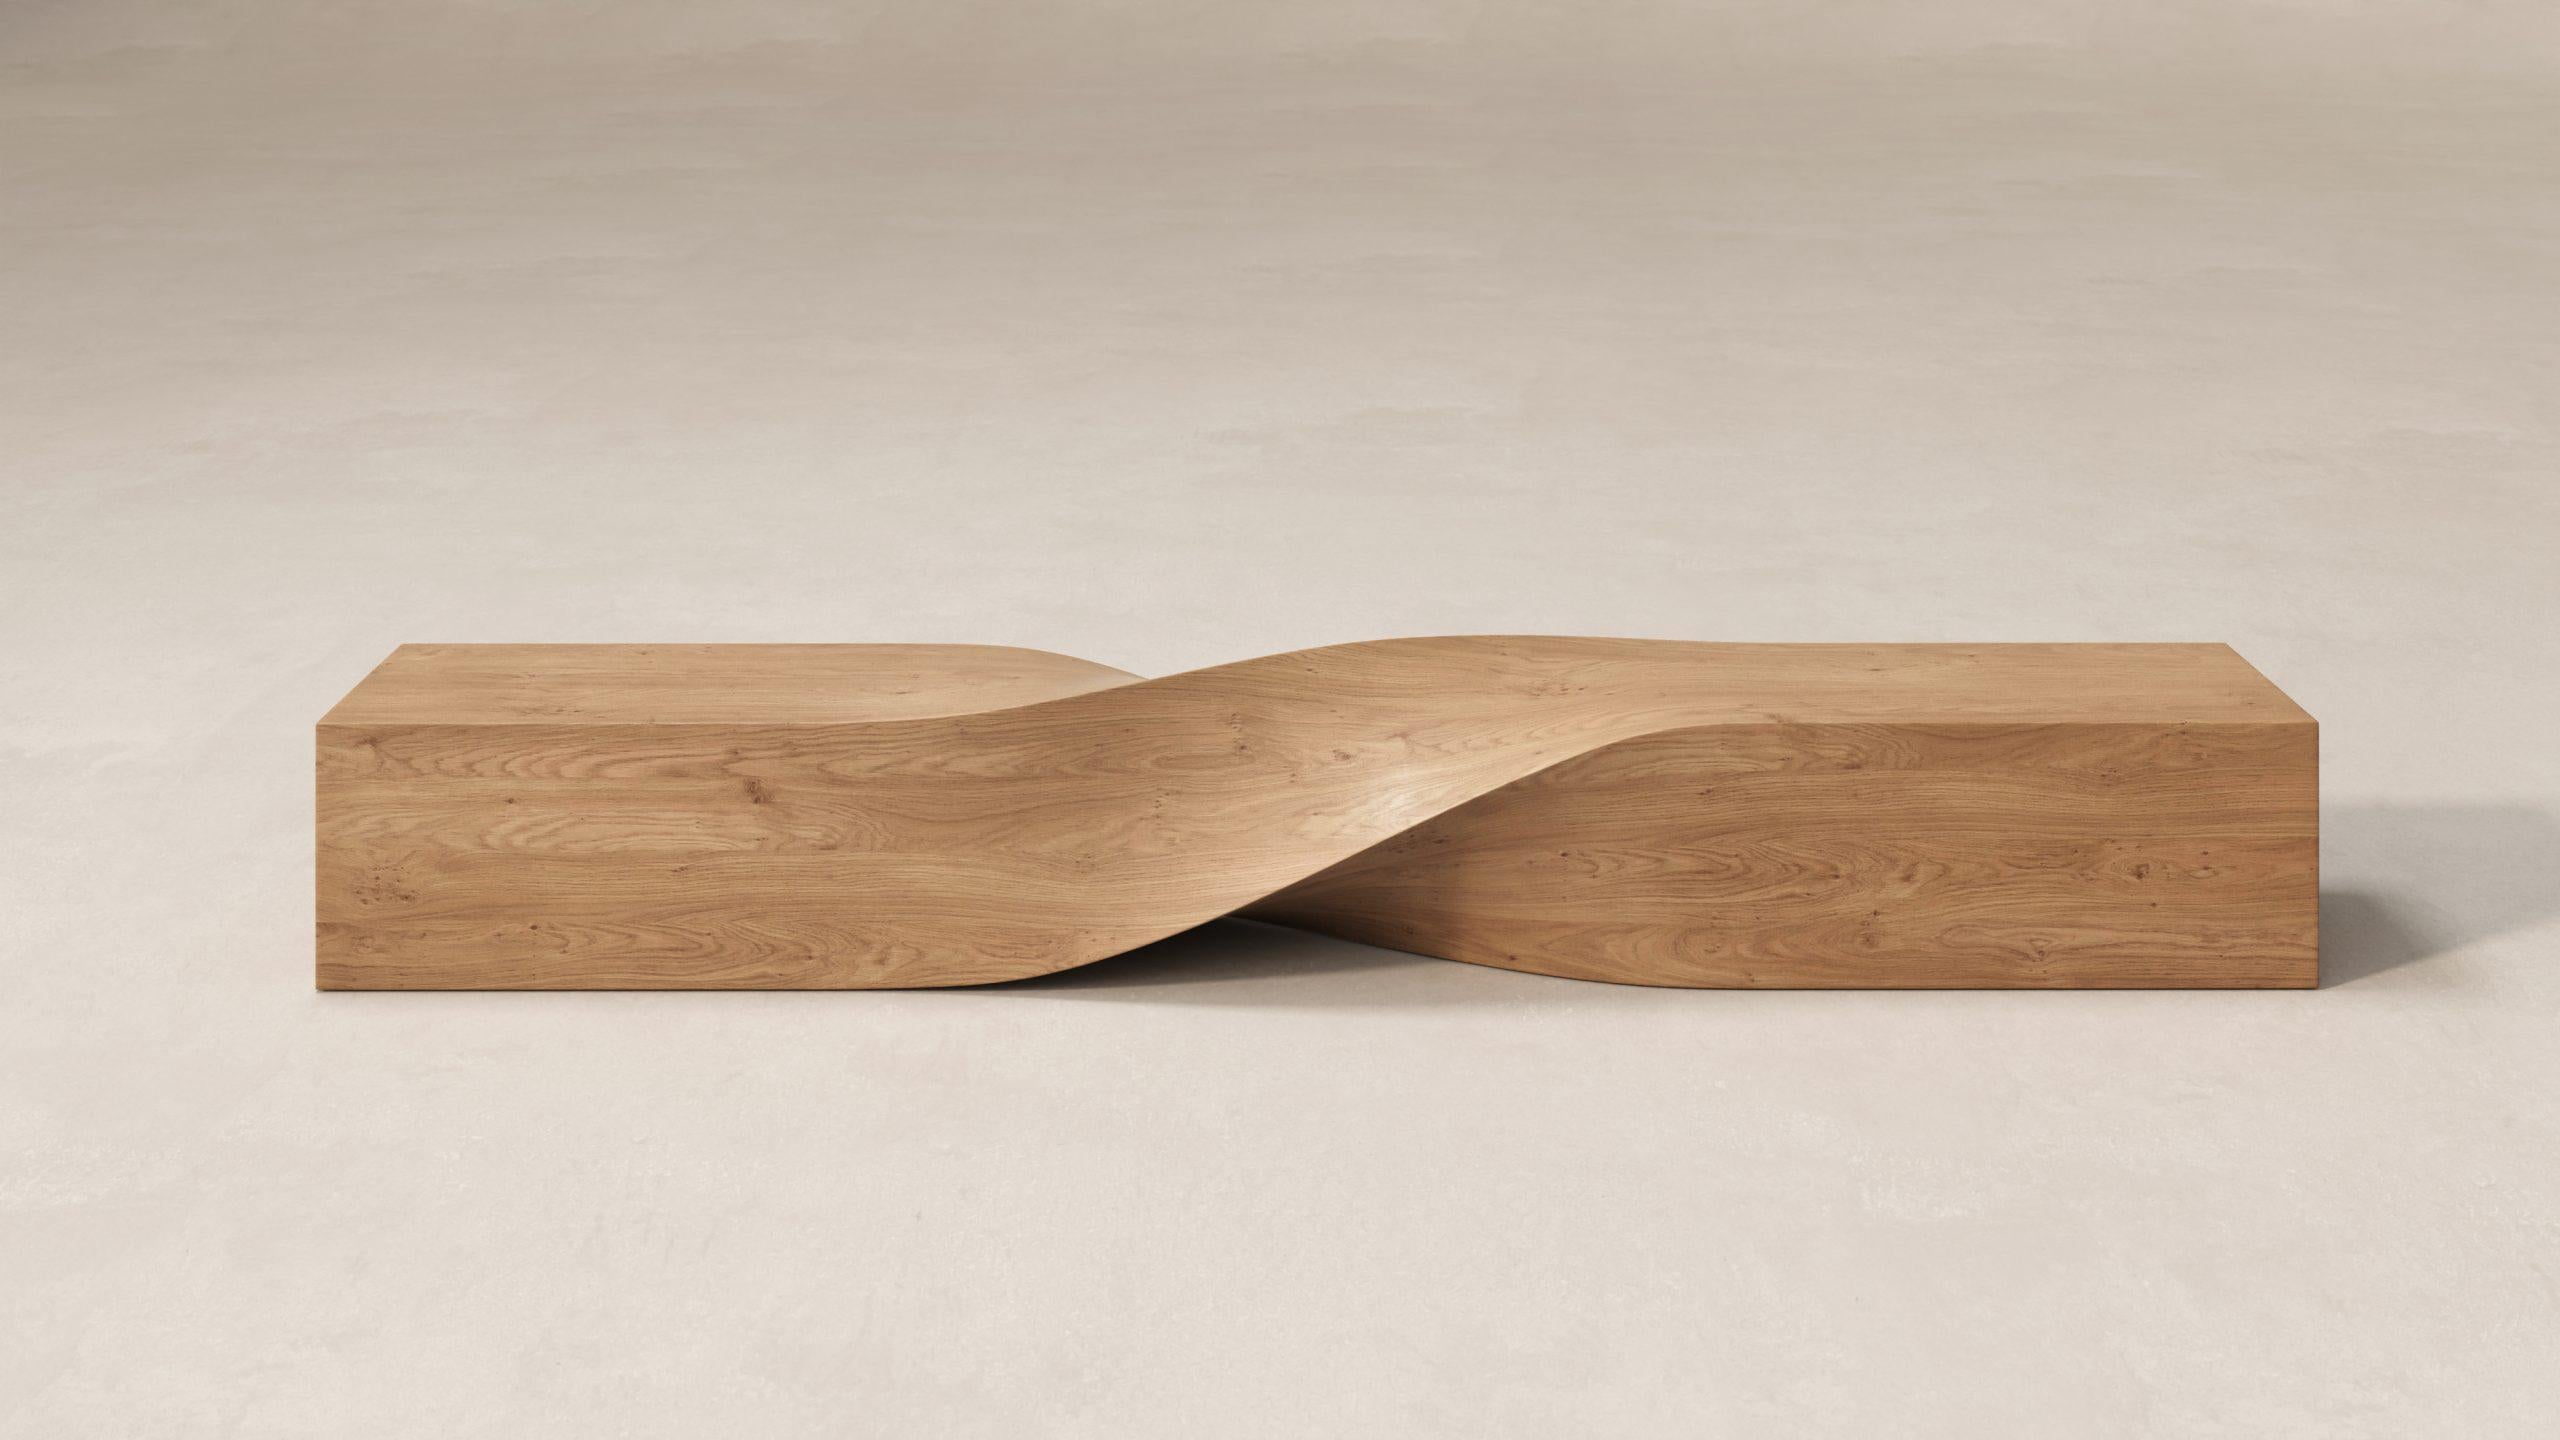 Soul sculpture bench in totem wood large by Veronica Mar
Dimensions: D 300 x W 57 x H 51 cm. SH: 45 cm.
Materials: Totem Wood
Weight: 150 kg.
It is available in 2,5 meters & 3 meters long.

Soul, anima, immaterial entity, vital principle, internal